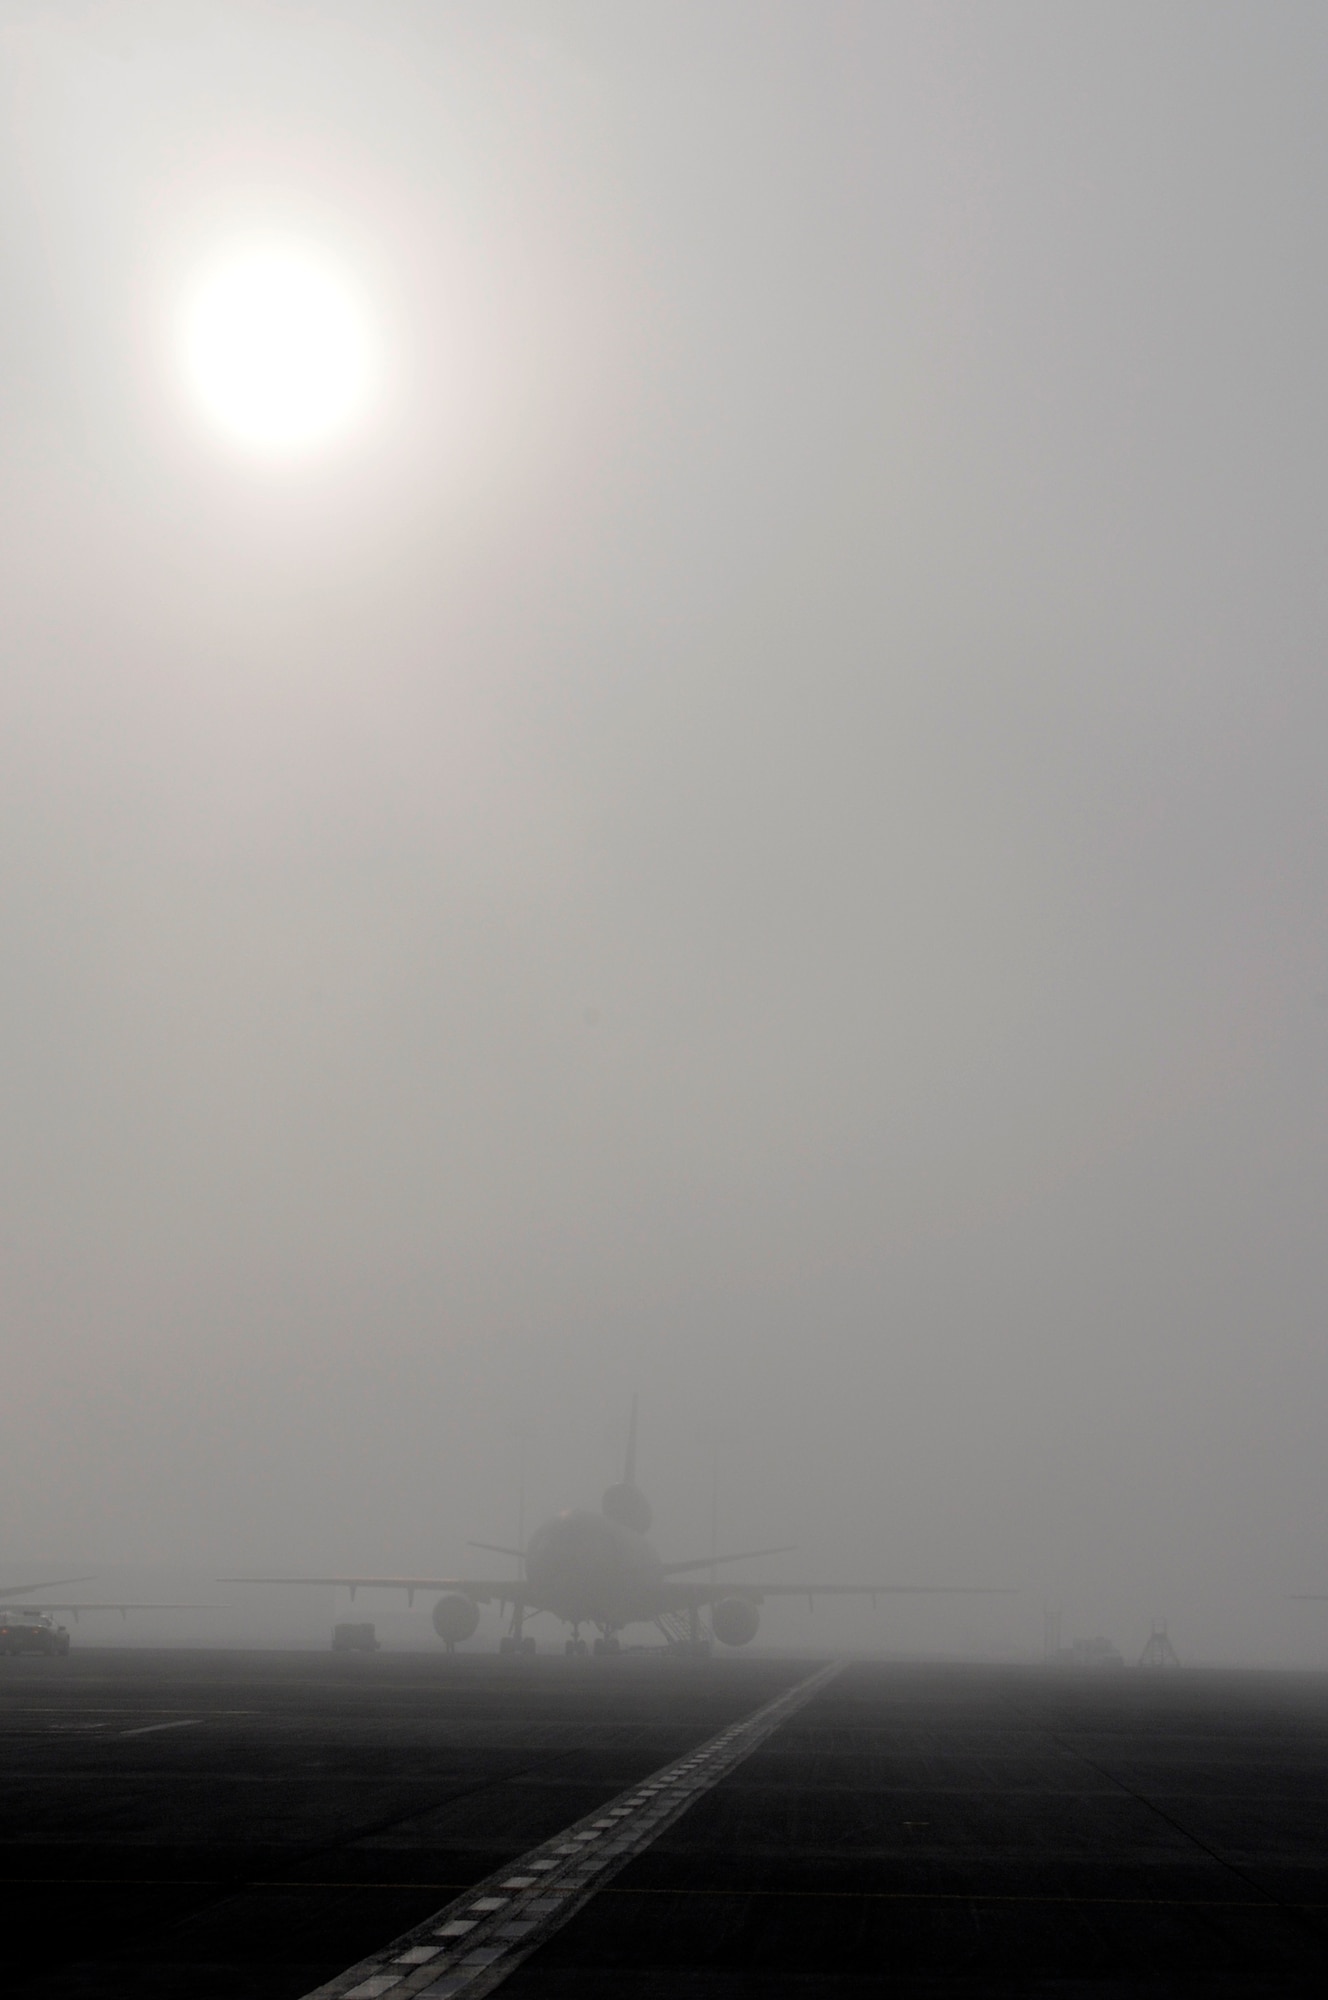 SOUTHWEST ASIA - A KC-10 Extender sits on the flightline at the 380th Air Expeditionary Wing as the sun breaks through on a foggy morning, Jan 28. The 380th AEW always stands mission ready. (U.S. Air Force photo by Senior Airman Brian J. Ellis) (Released)